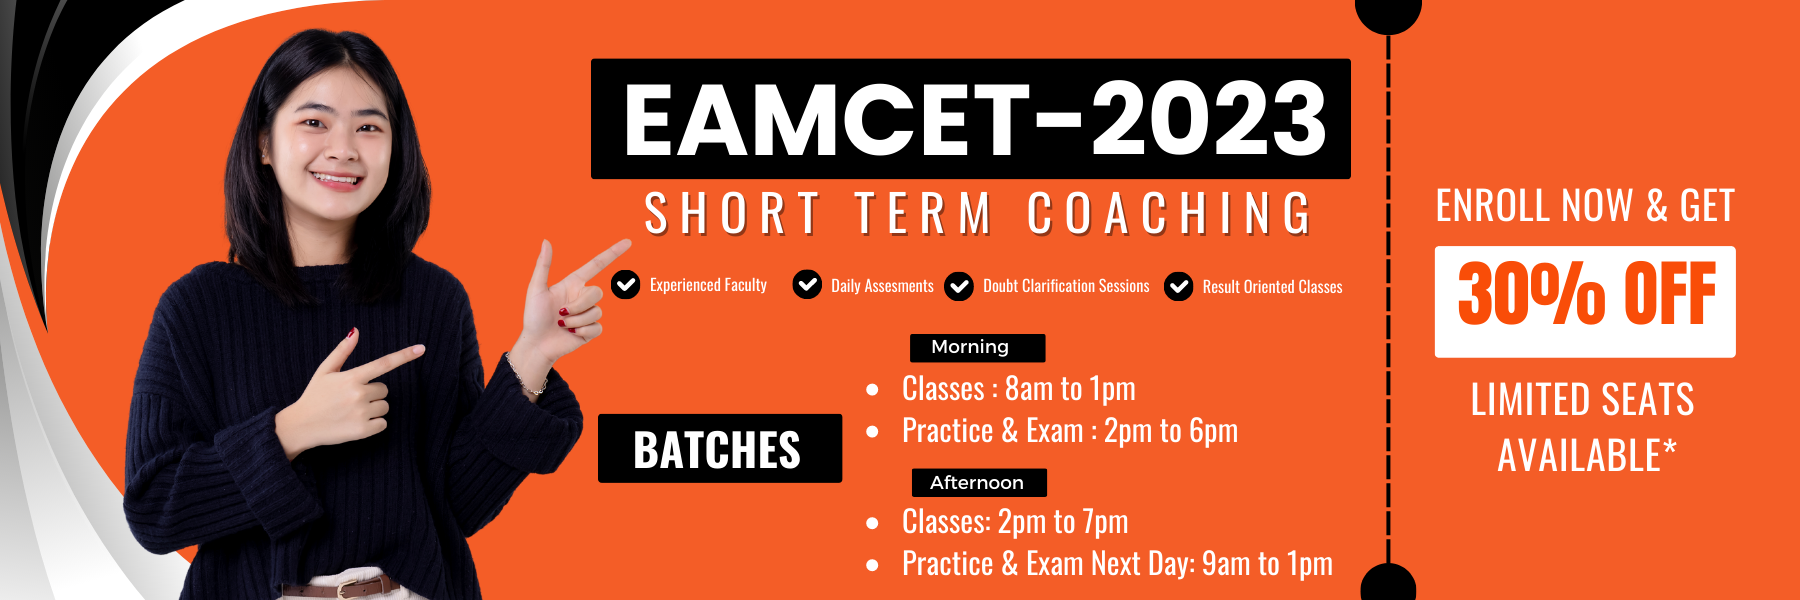 EAMCET Coaching Centre in Hyderabad